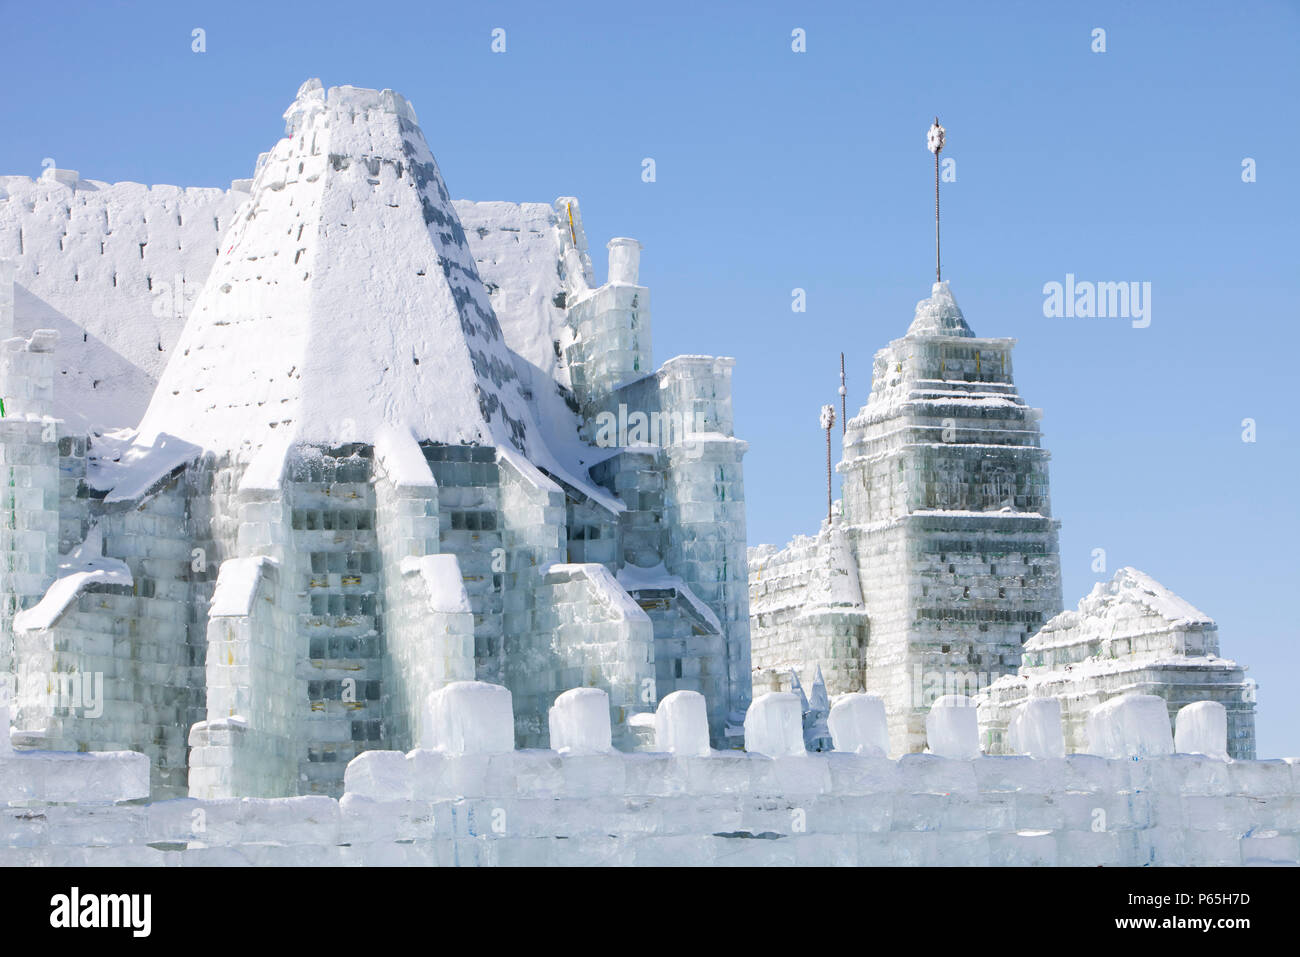 An ice palace built with blocks of ice from the Songhue river in Harbin, Heilongjiang Province, Northern China Stock Photo